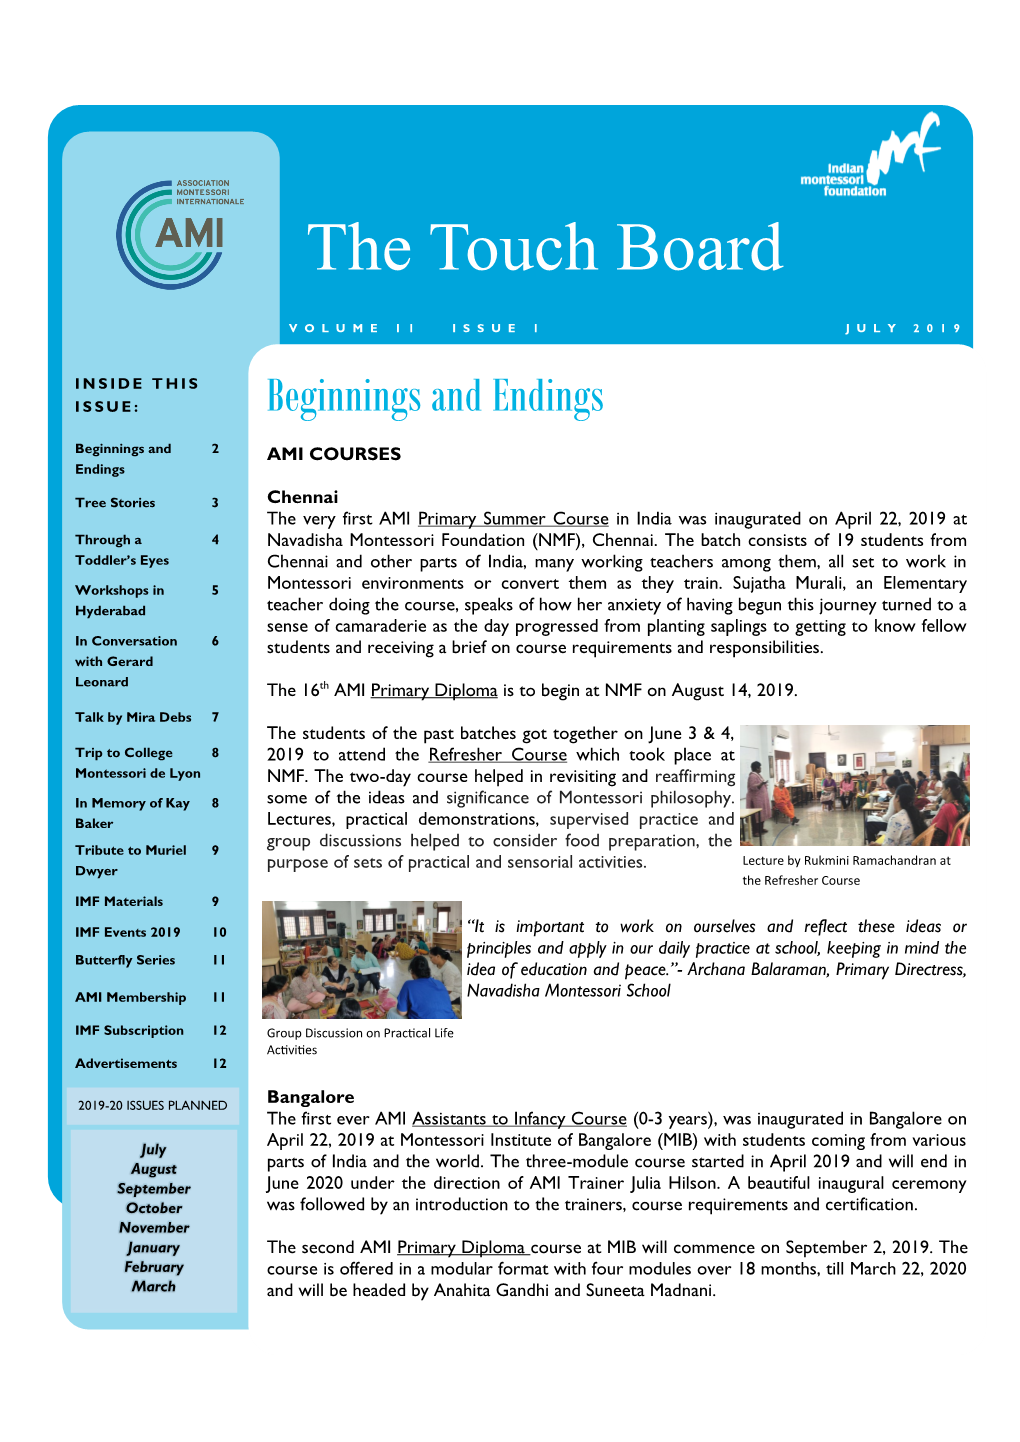 The Touch Board